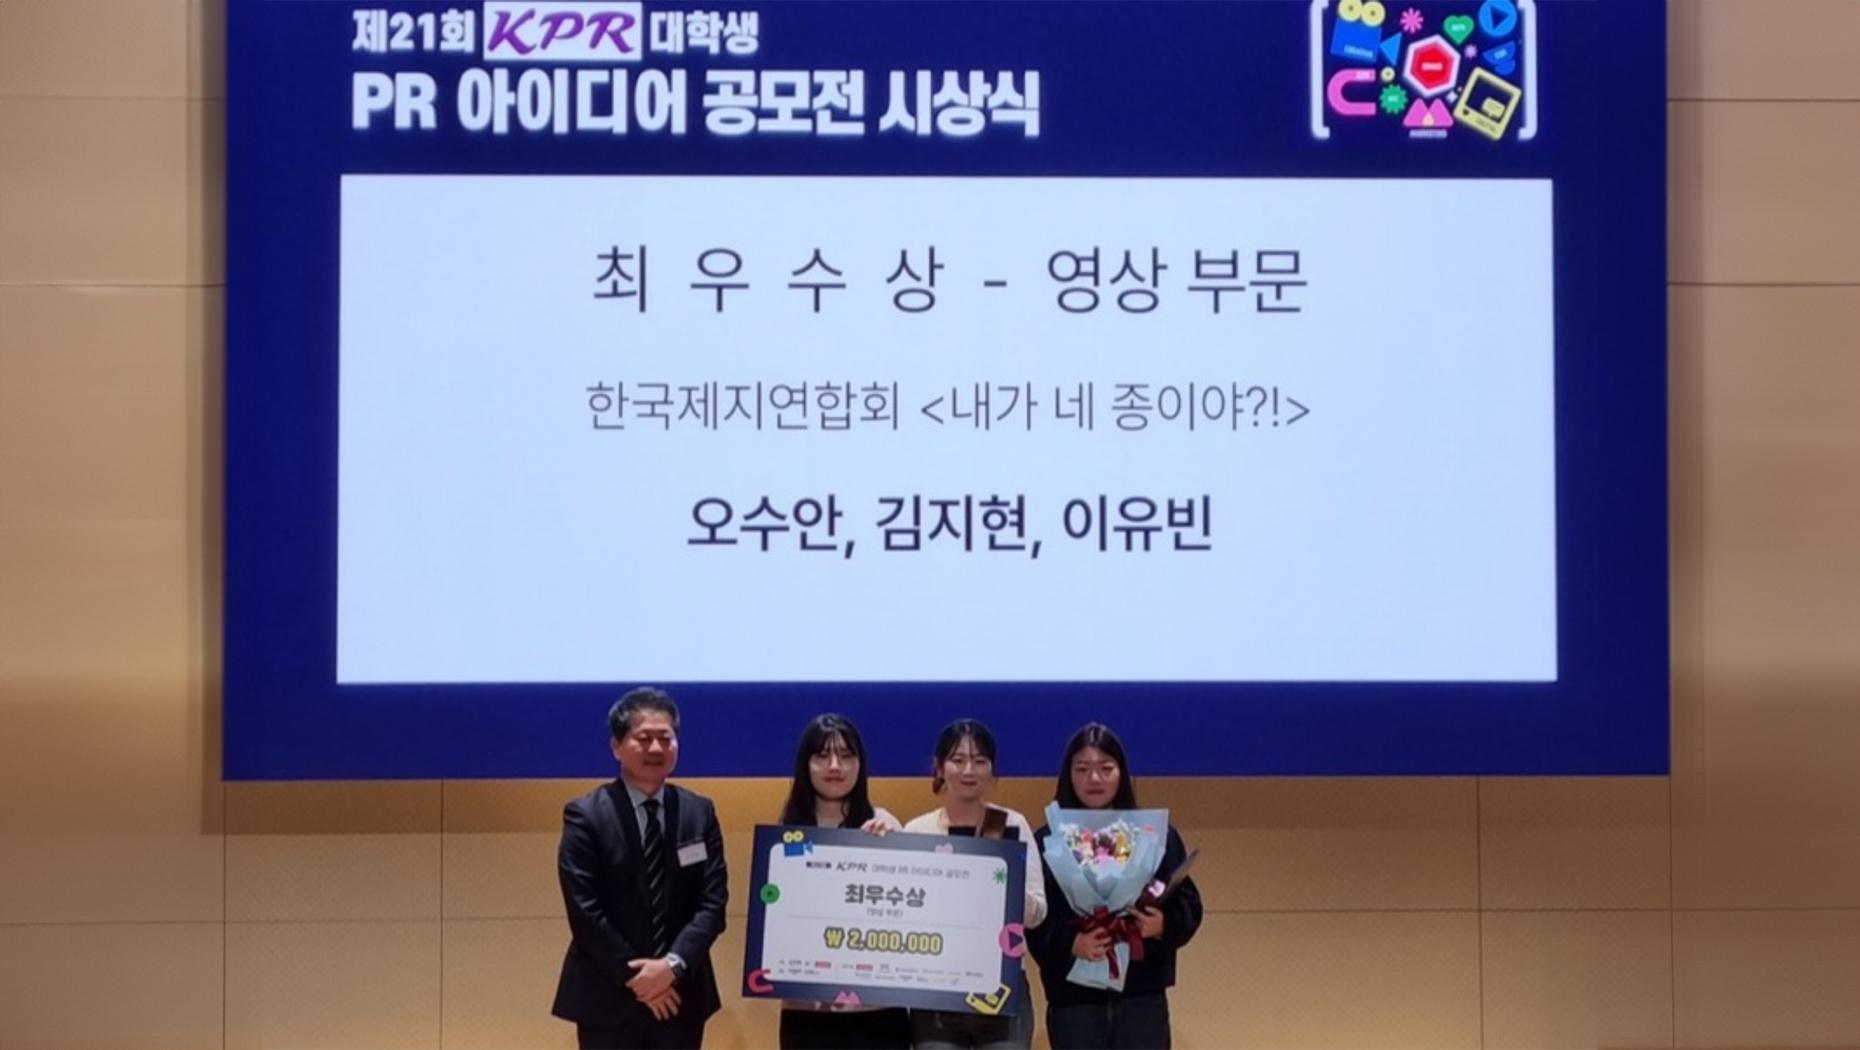 Students in the Department of Media Communication at Incheon National University Wins the Best Prize in the KPR College Student Contest 대표이미지